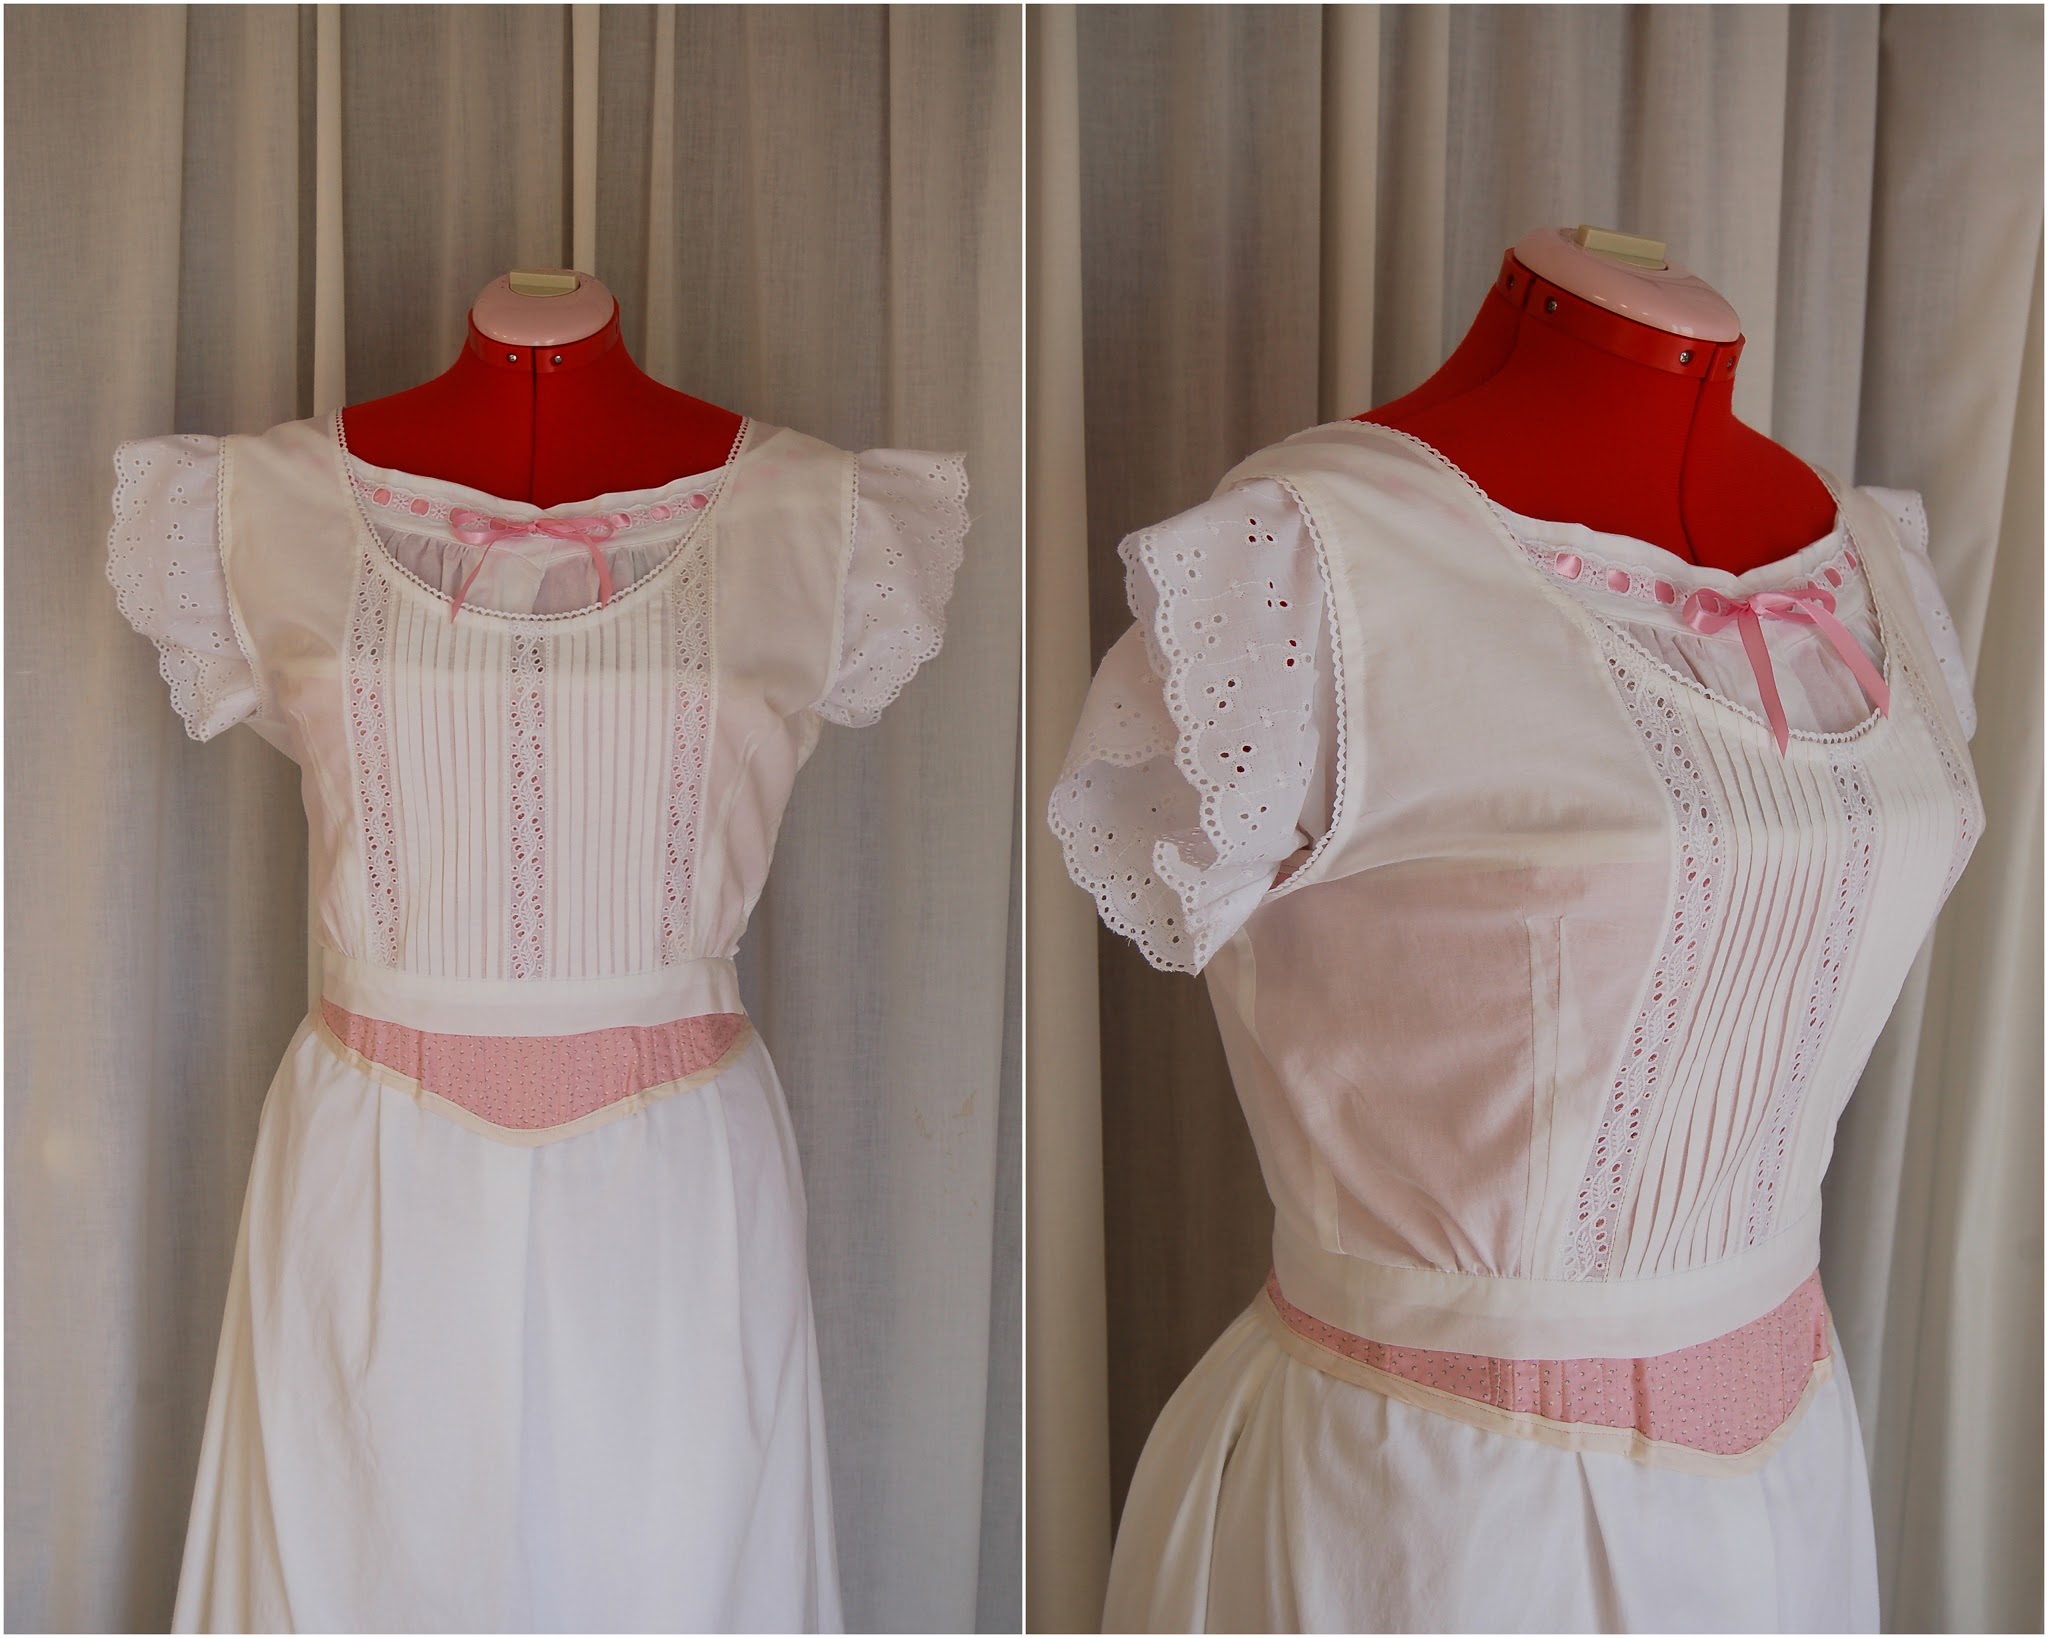 Dolly Creates: • 1860s Underpinnings